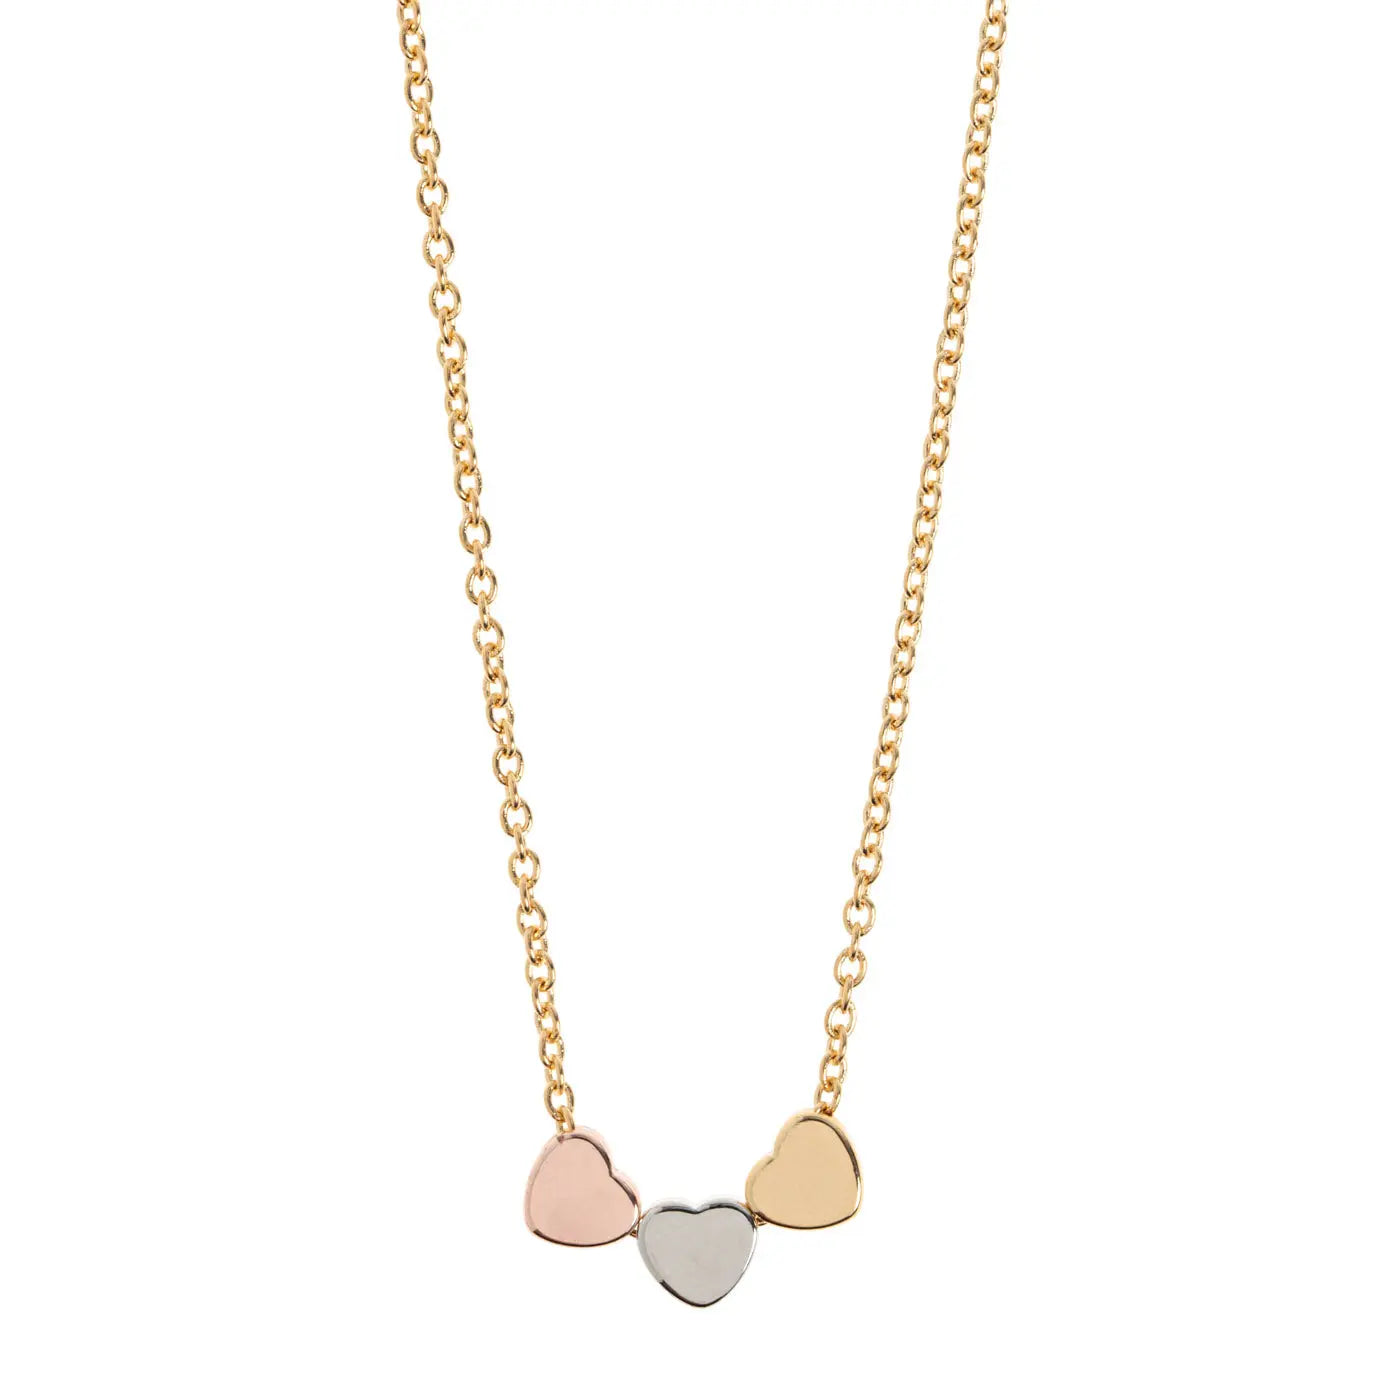 Sarah - 3 Sliding Hearts Necklace Stainless Steel